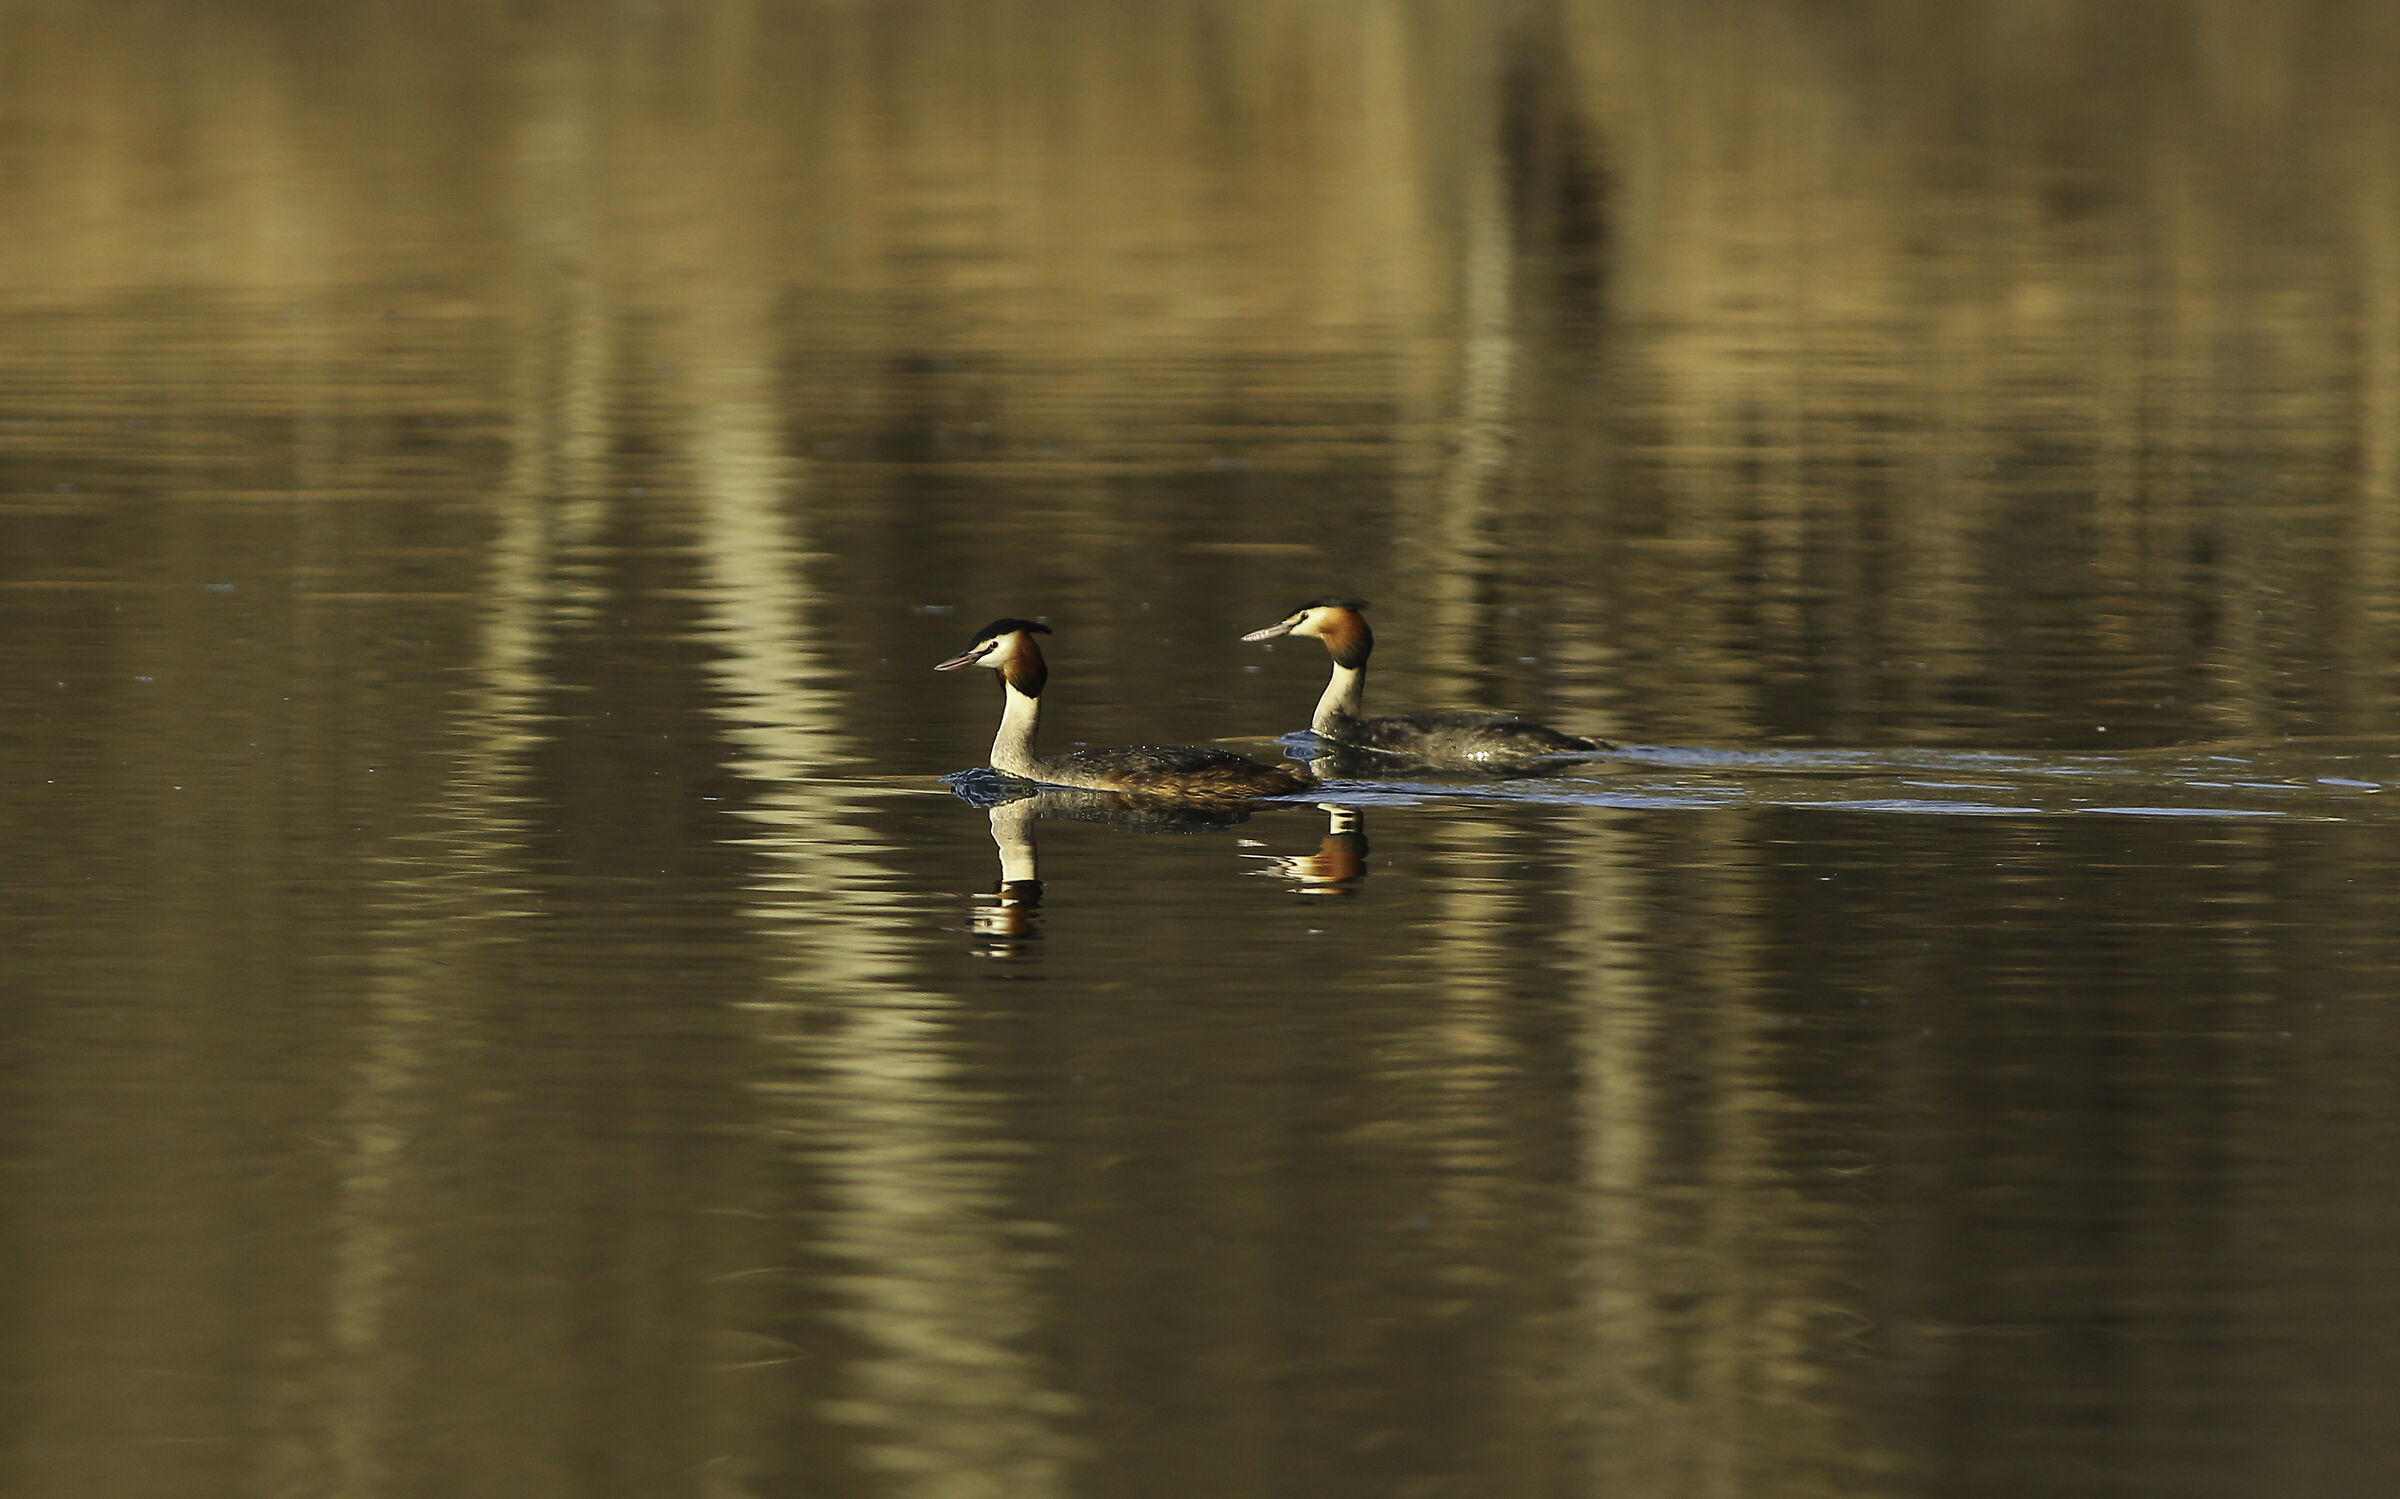 2 Grebes in company...